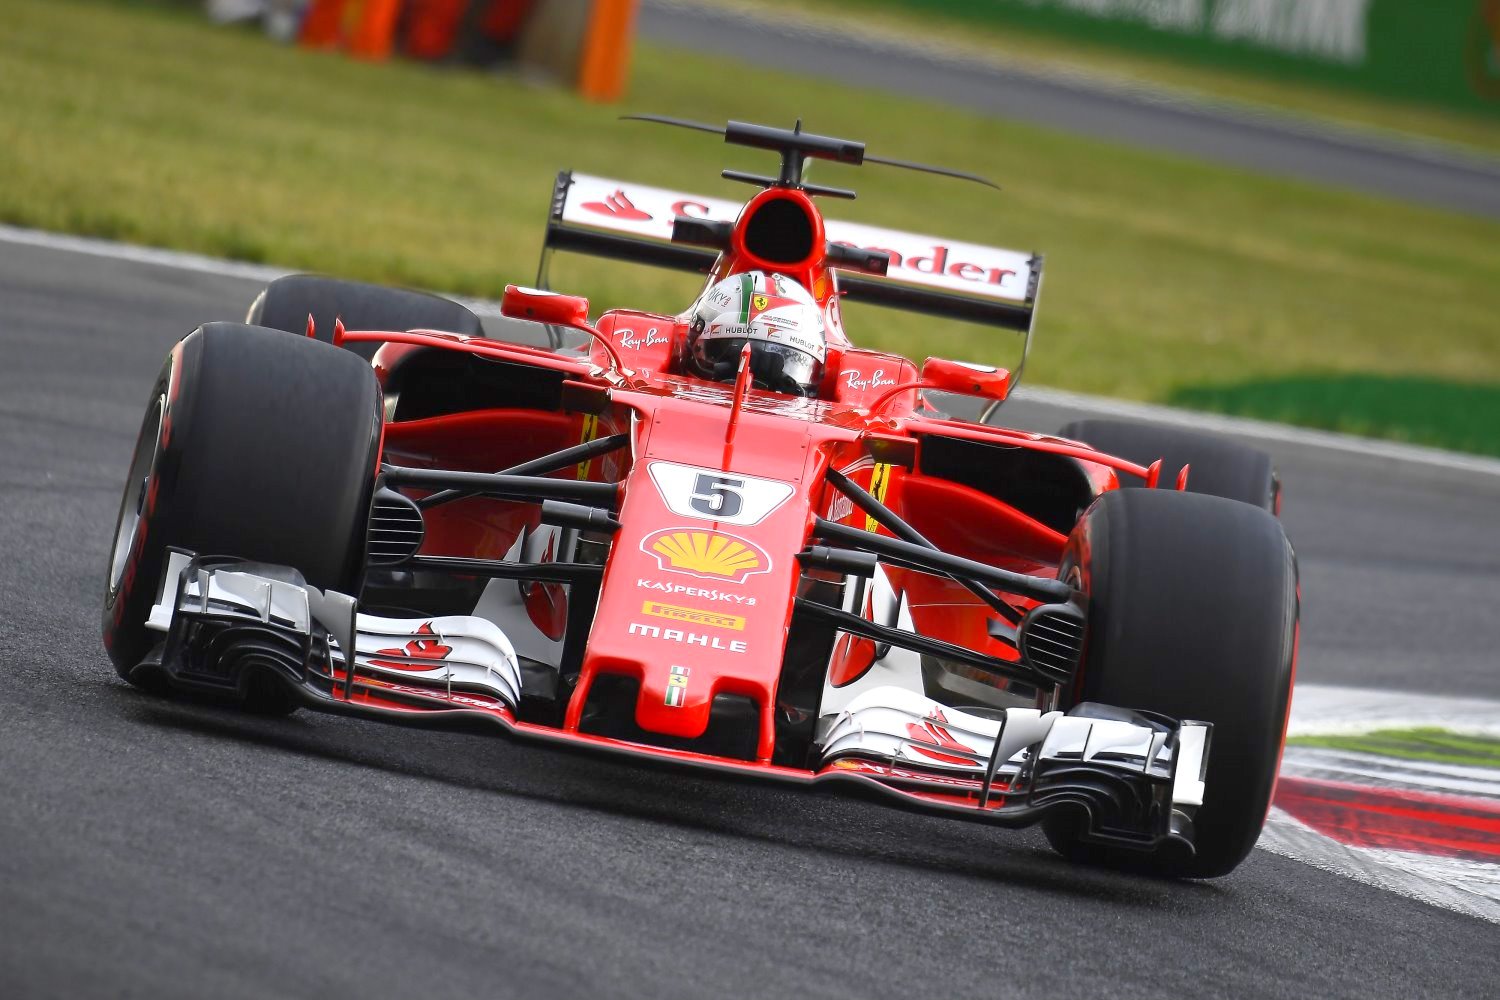 Should Liberty Media tell Ferrari to go pound sand for the good of the sport?